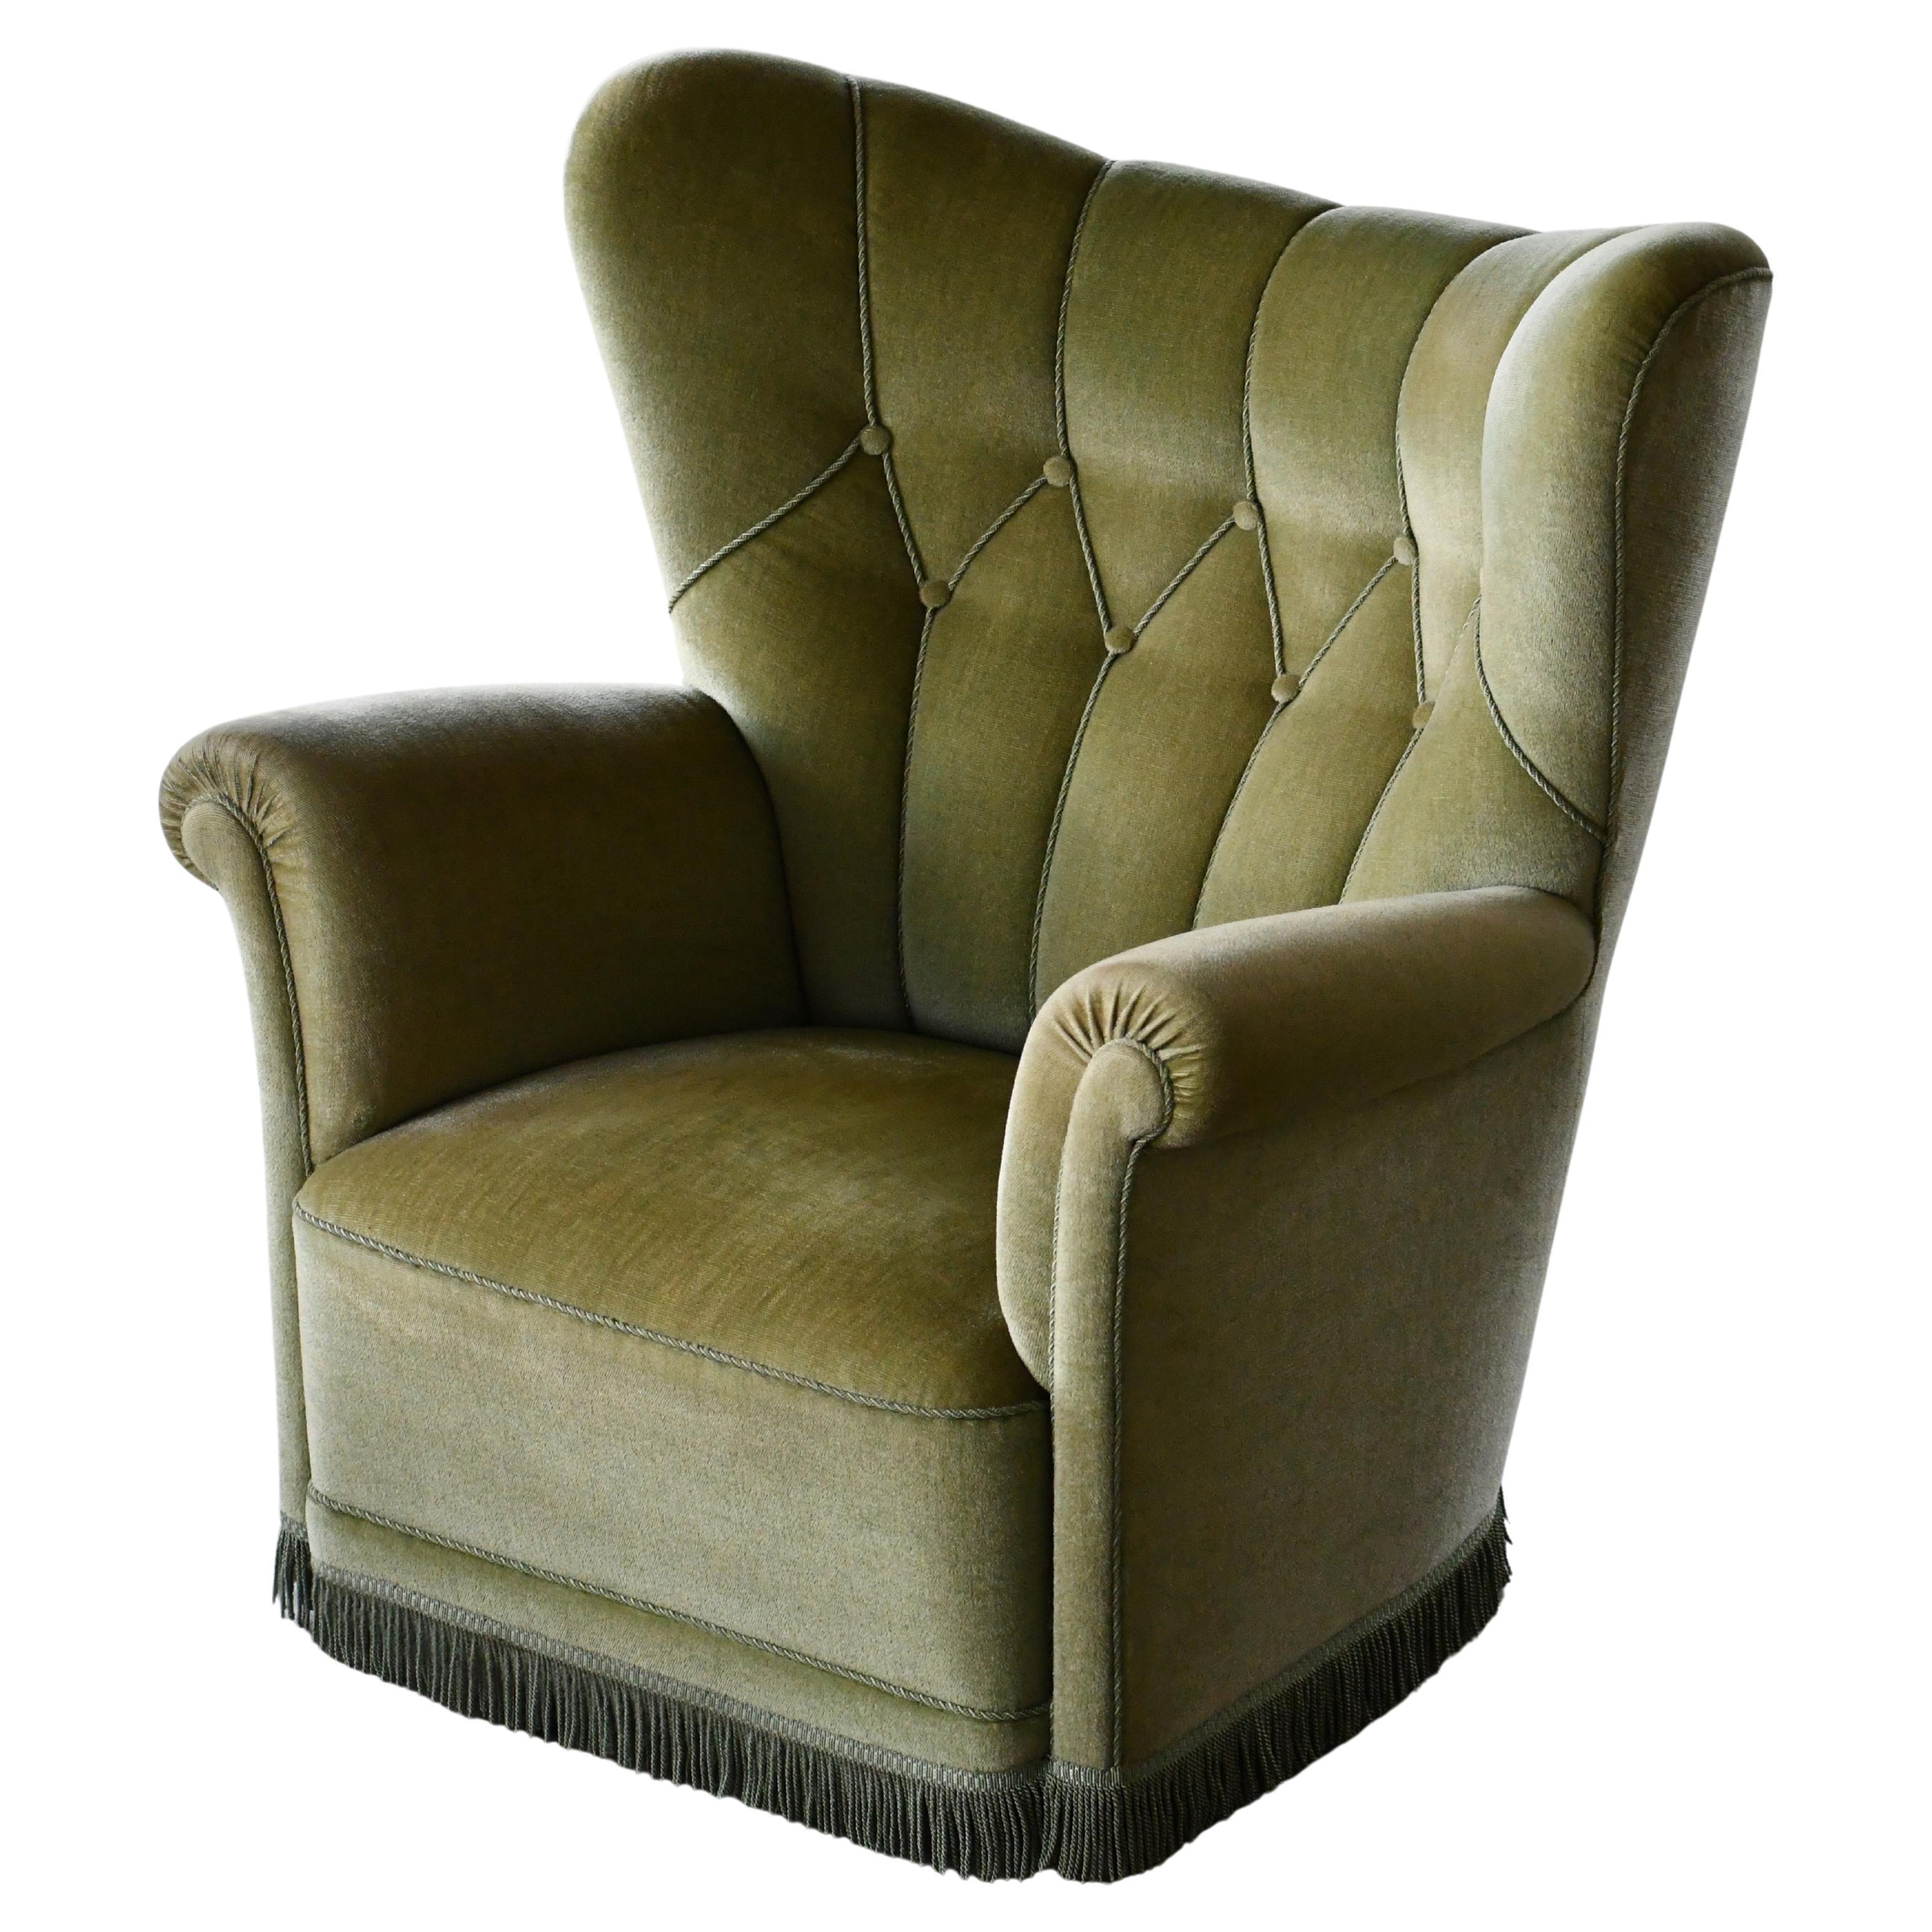 Danish Mid-Century Lounge or Club Chair in Green Mohair, 1940's For Sale